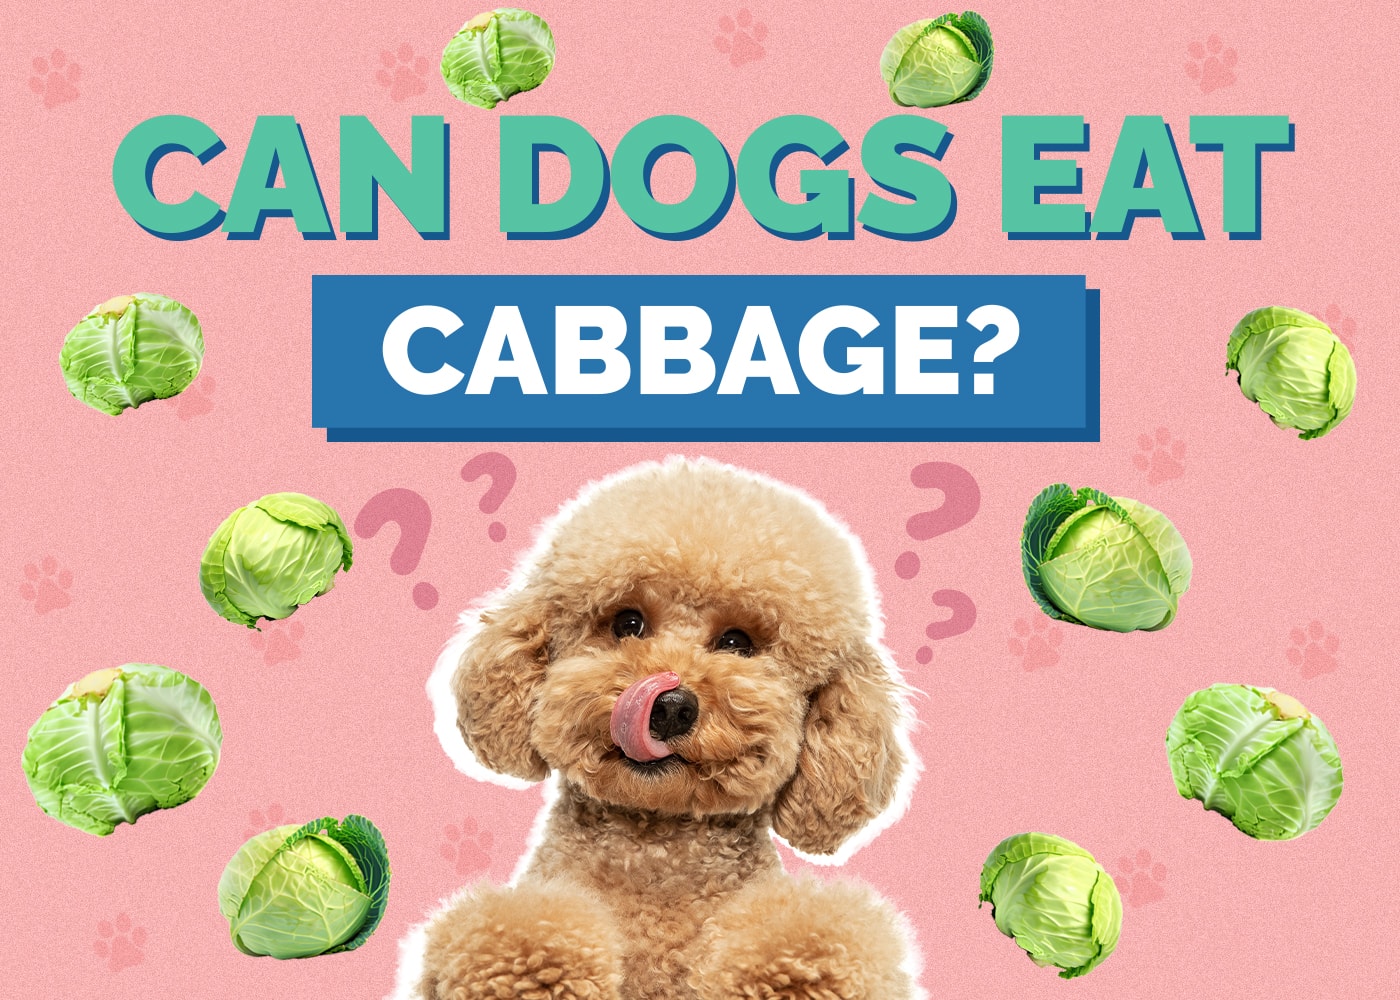 Can Dog Eat cabbage